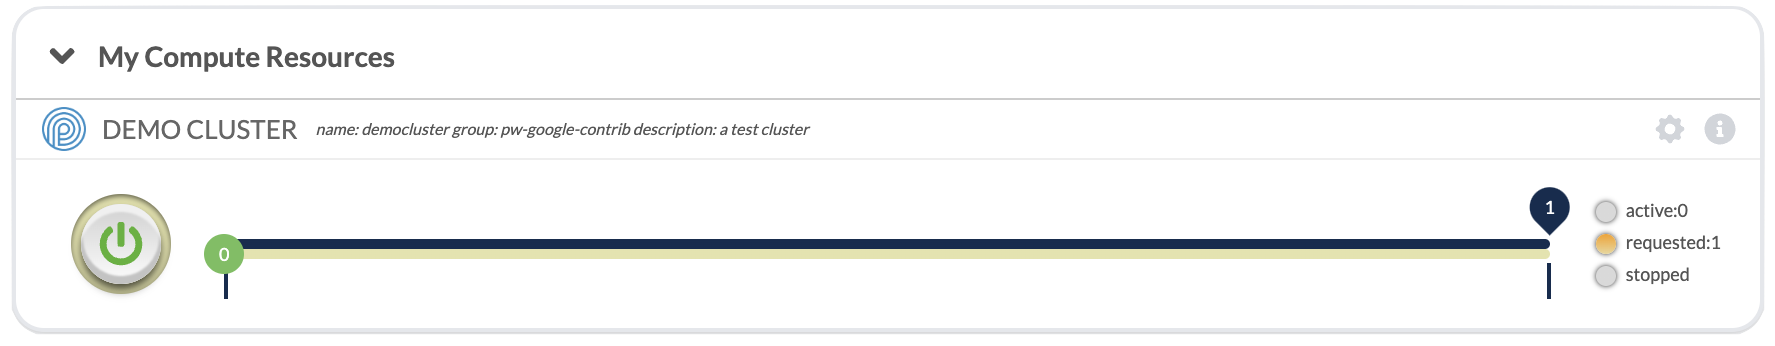 Screenshot of cluster starting up. The power button flashes green and the requested bubble on the right is yellow.